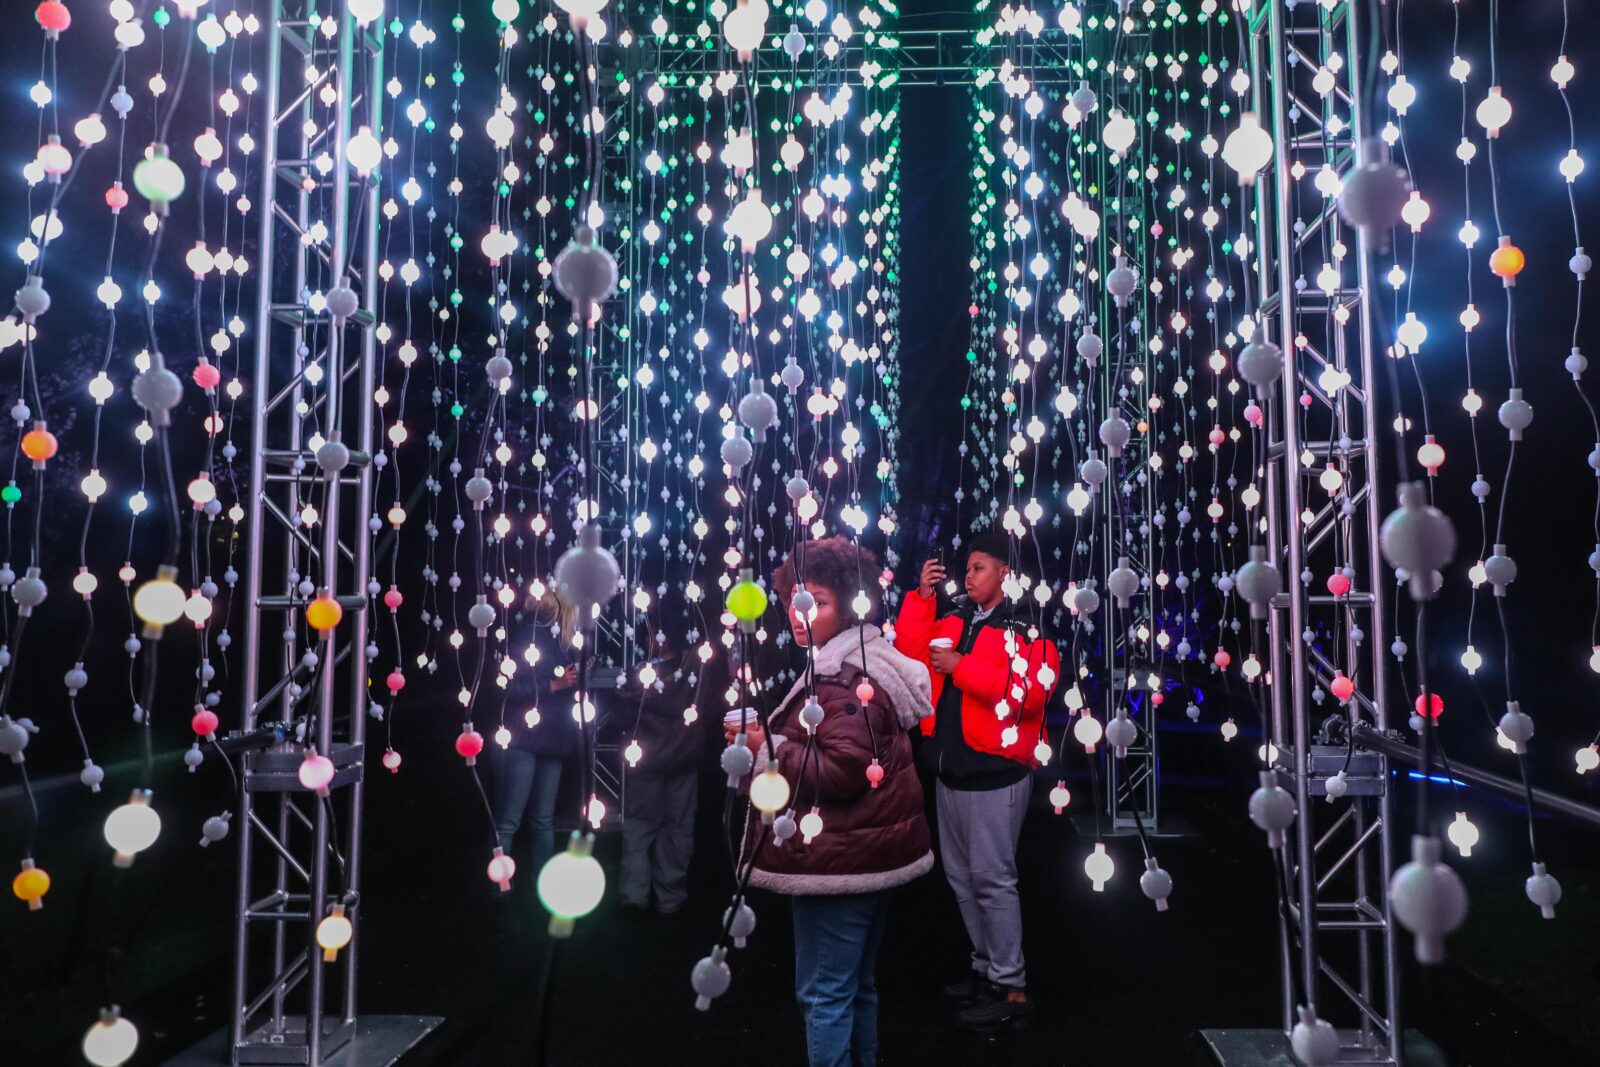 Lightscape is back at BBG with a million lights, new surprises, Taylor Swift  and a 'Brooklyn Hip-Hop Zone' - Brooklyn Magazine